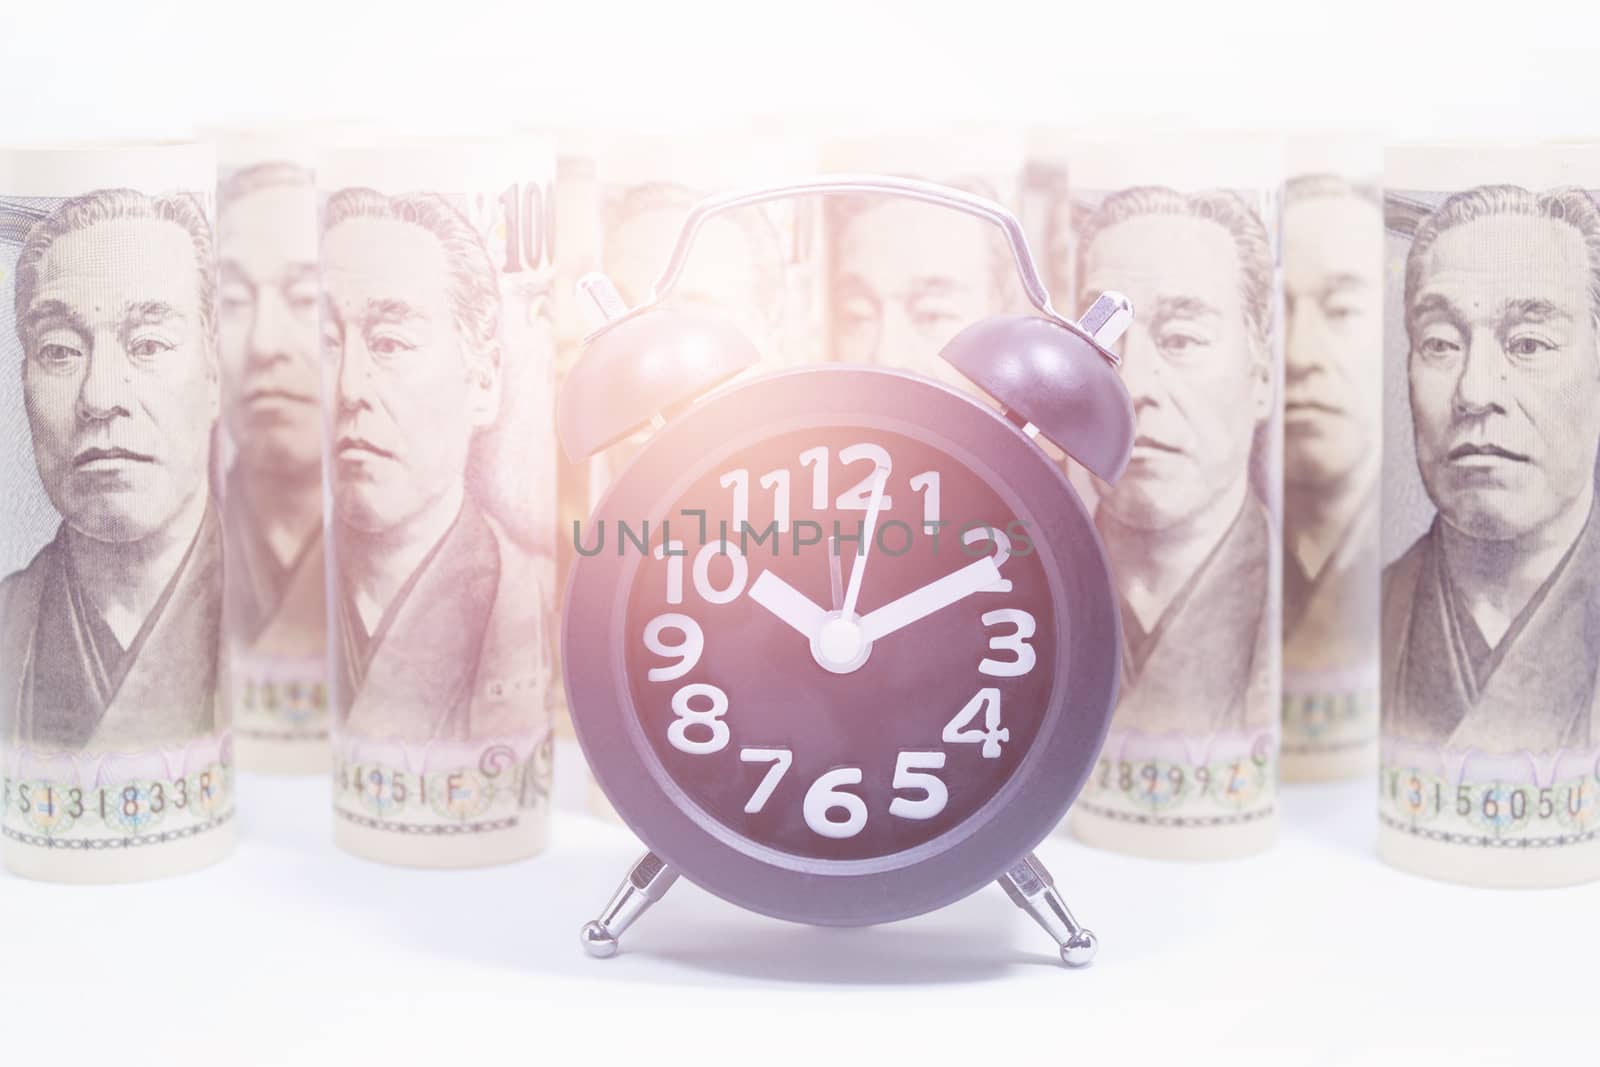 Classic Clock On Roll Of Yen Banknote, Concept And Idea Of Time  by rakoptonLPN